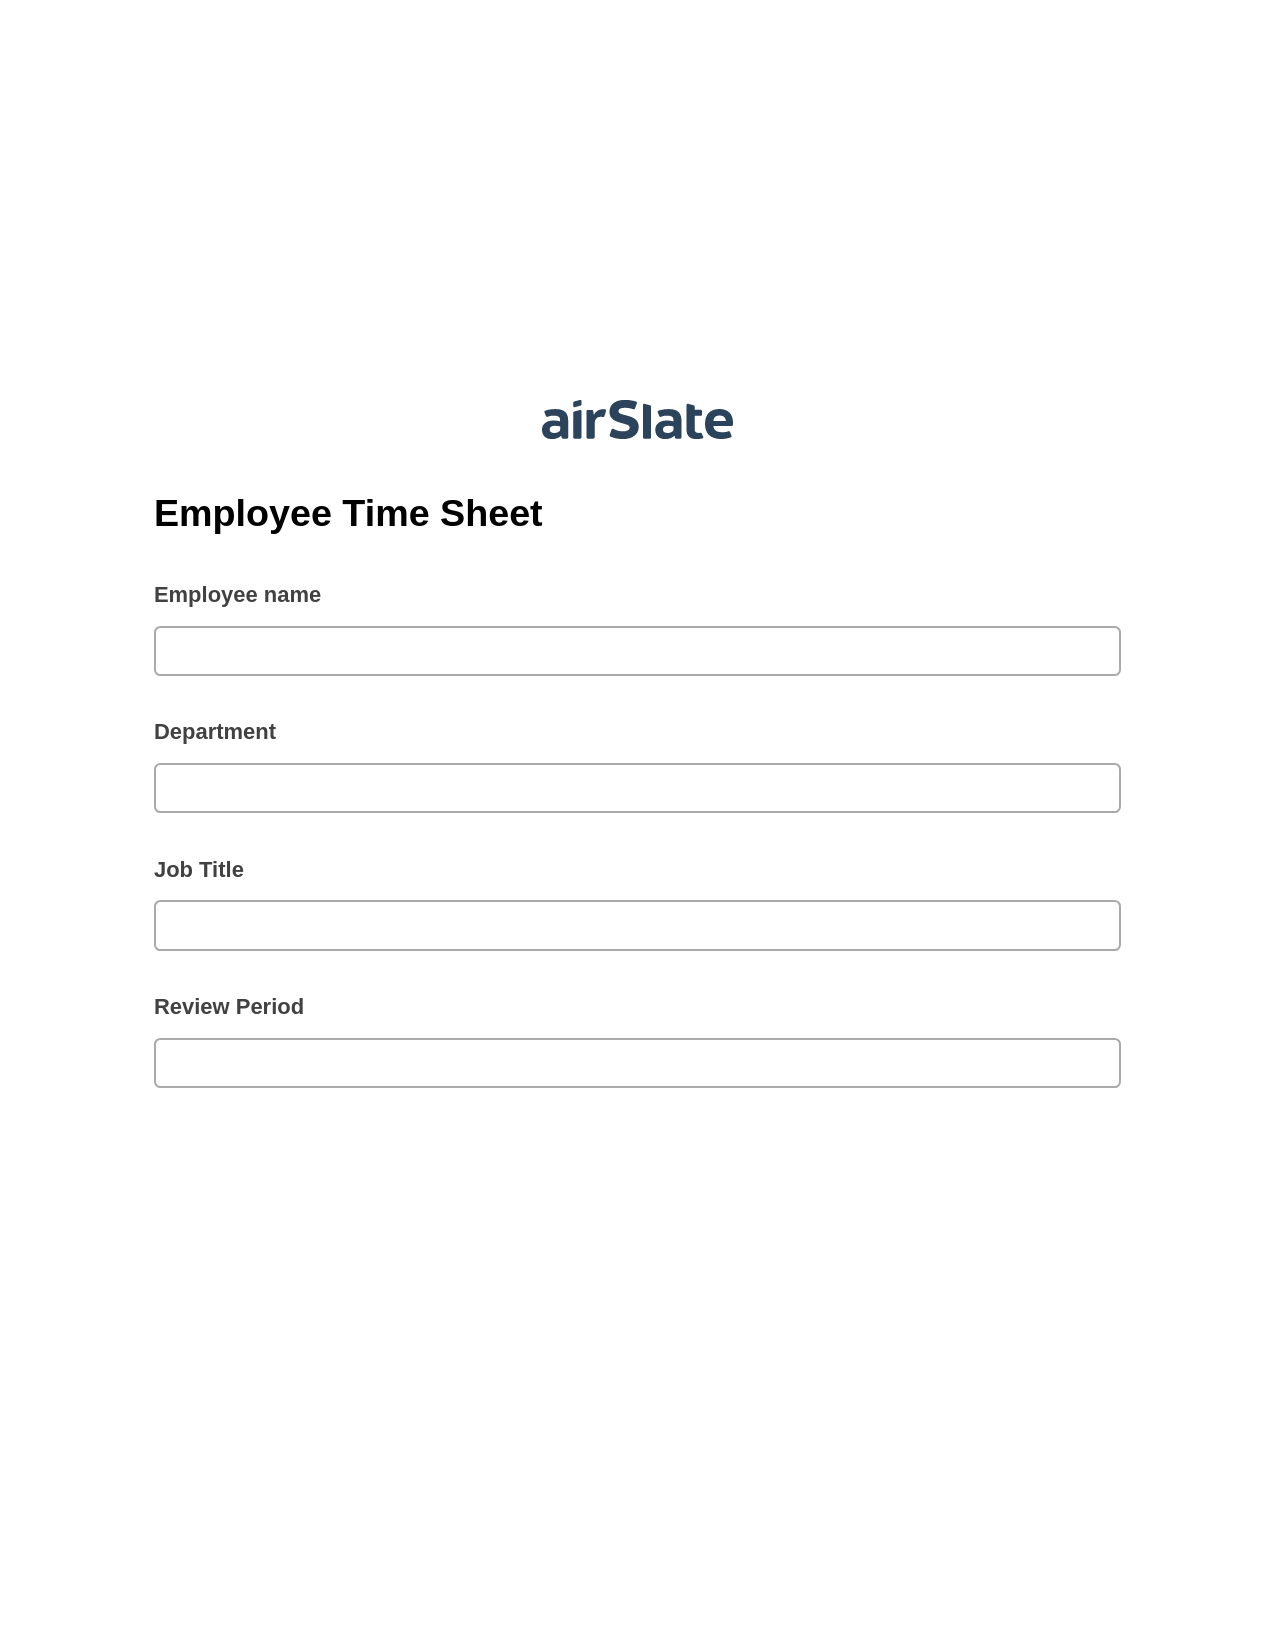 Employee Time Sheet Pre-fill from CSV File Bot, Update Audit Trail Bot, Post-finish Document Bot